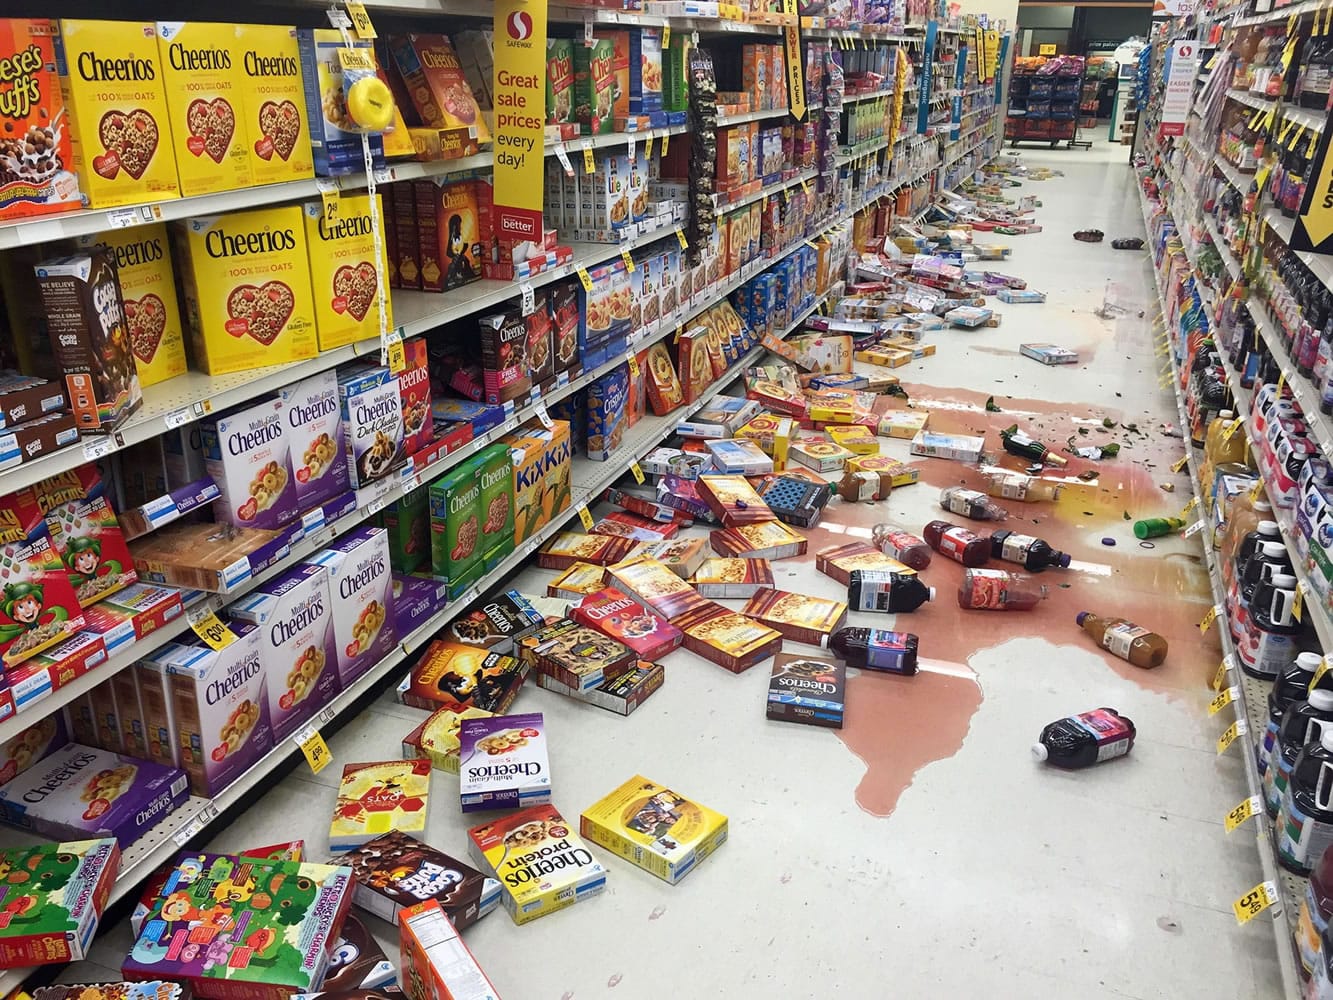 Boxes of cereal and bottles of juice lie on the floor of a Safeway grocery store Sunday following a magnitude-7.1 earthquake on the Kenai Peninsula, in south-central Alaska.